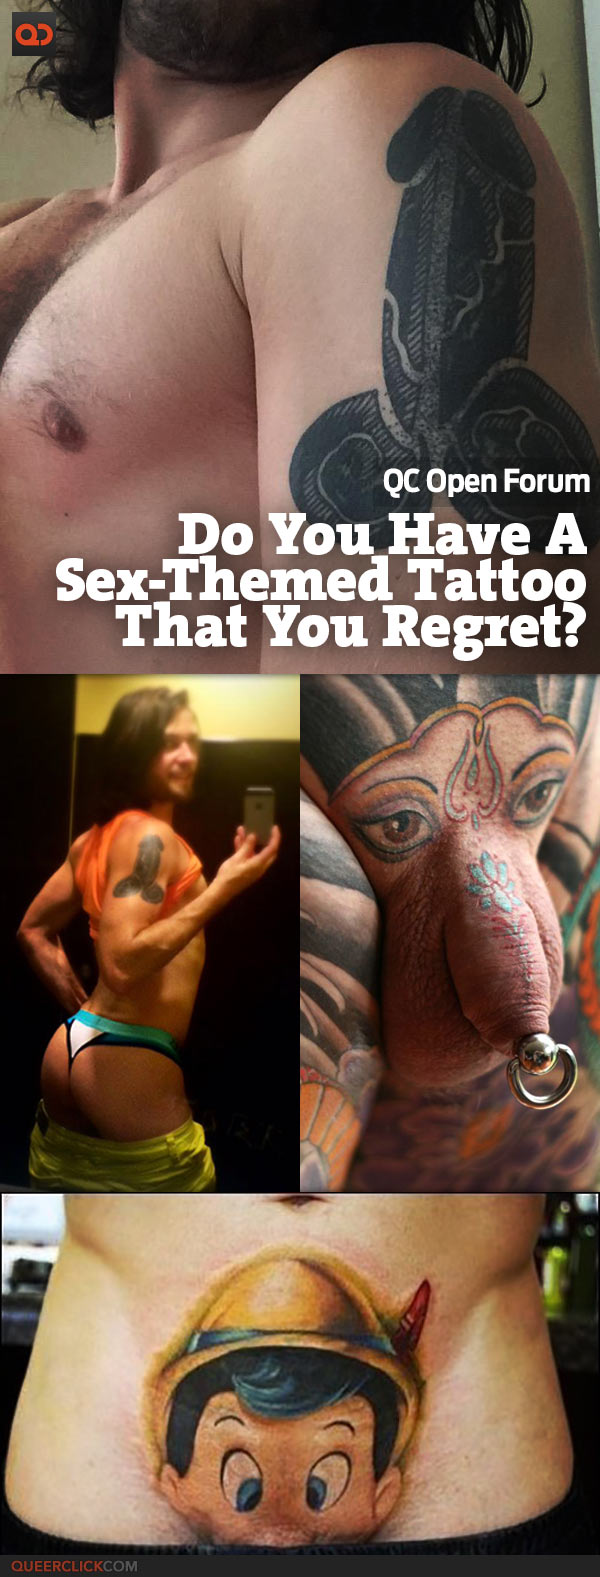 QC Open Forum: Do You Have A Sex-Themed Tattoo That You Regret?